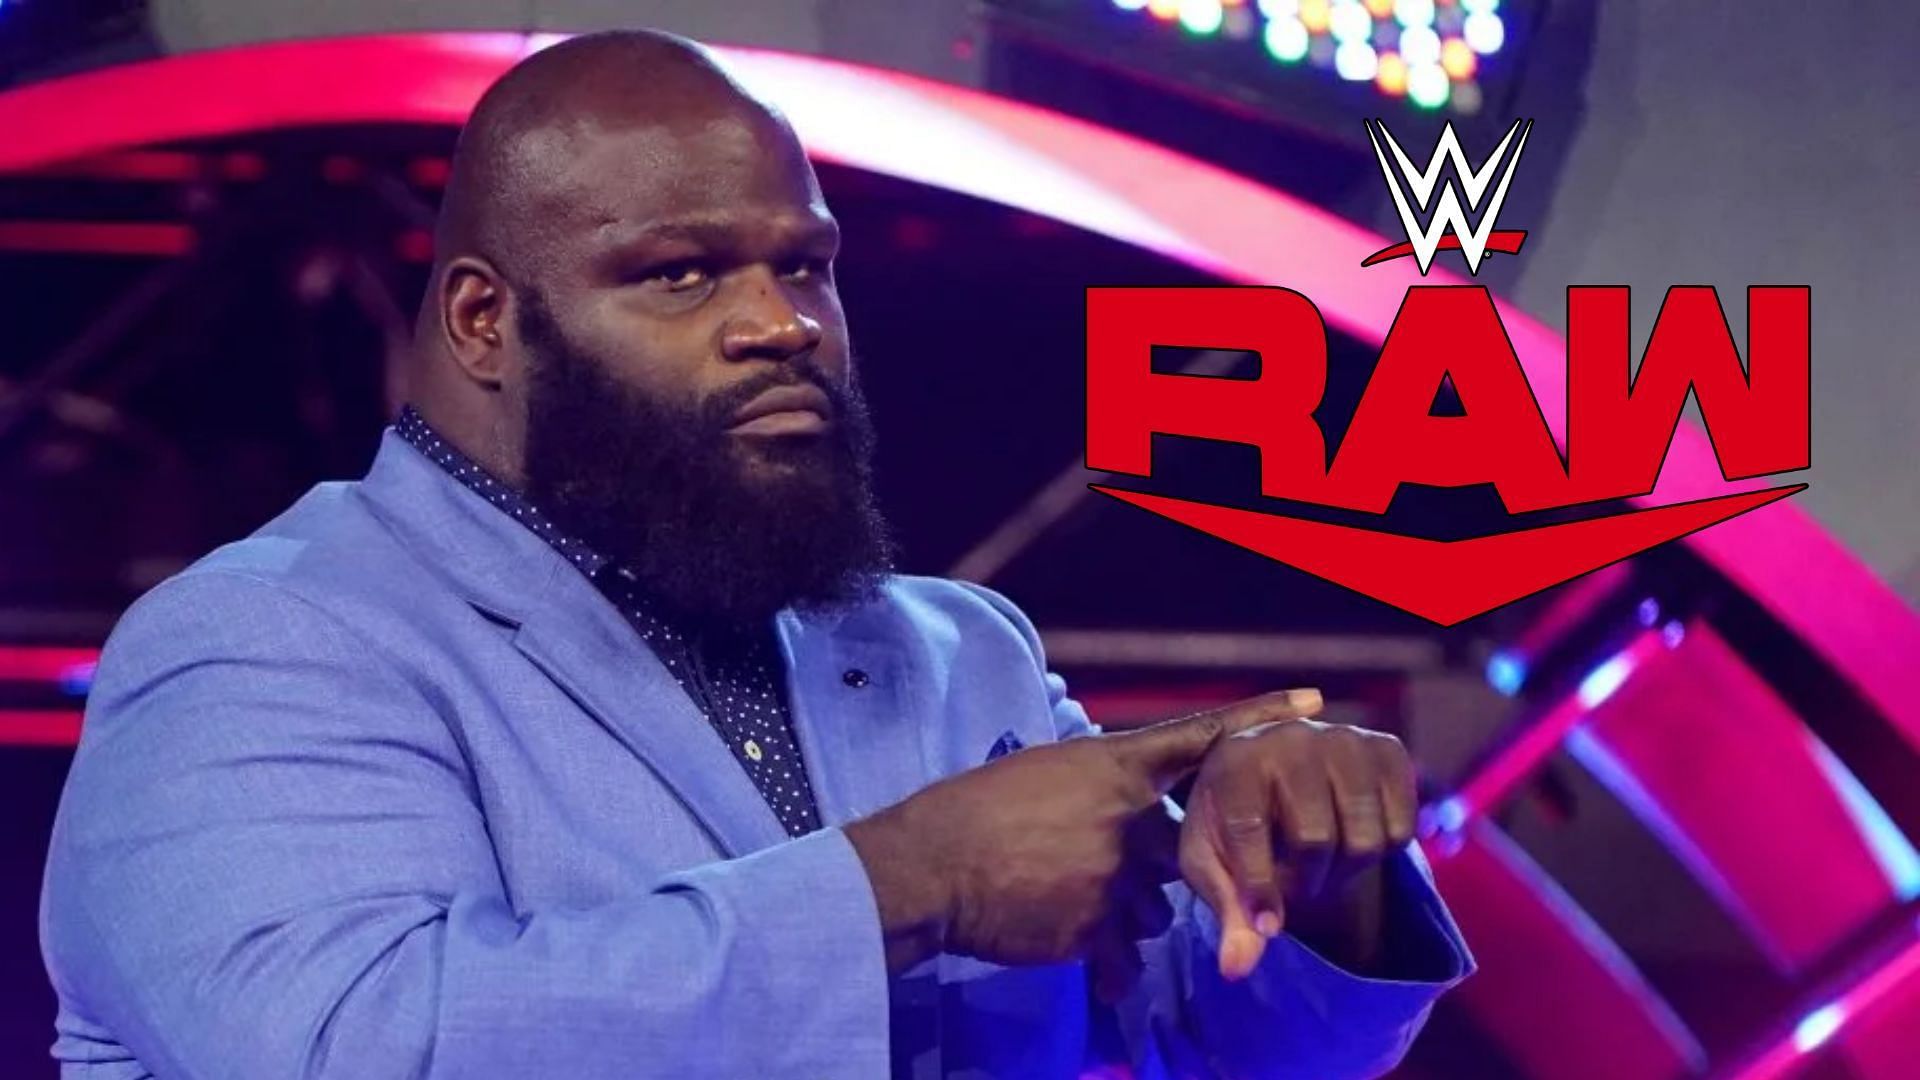 Mark Henry had some kind words for a young WWE star.